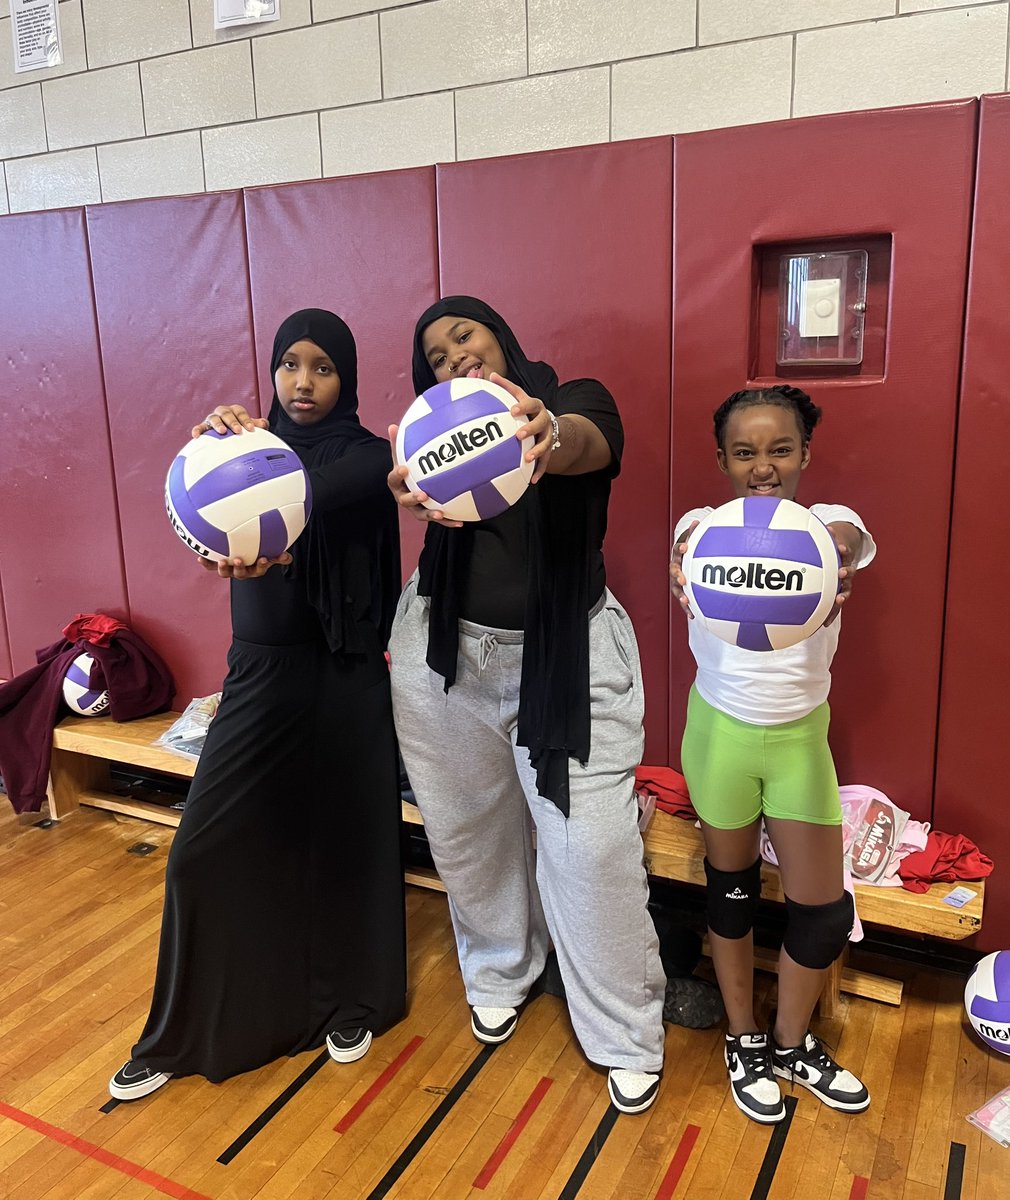 TCP Intramural Initiative is underway at BPS 18! ⭐️

Our first afterschool sport is volleyball…these ladies are ready for the court!